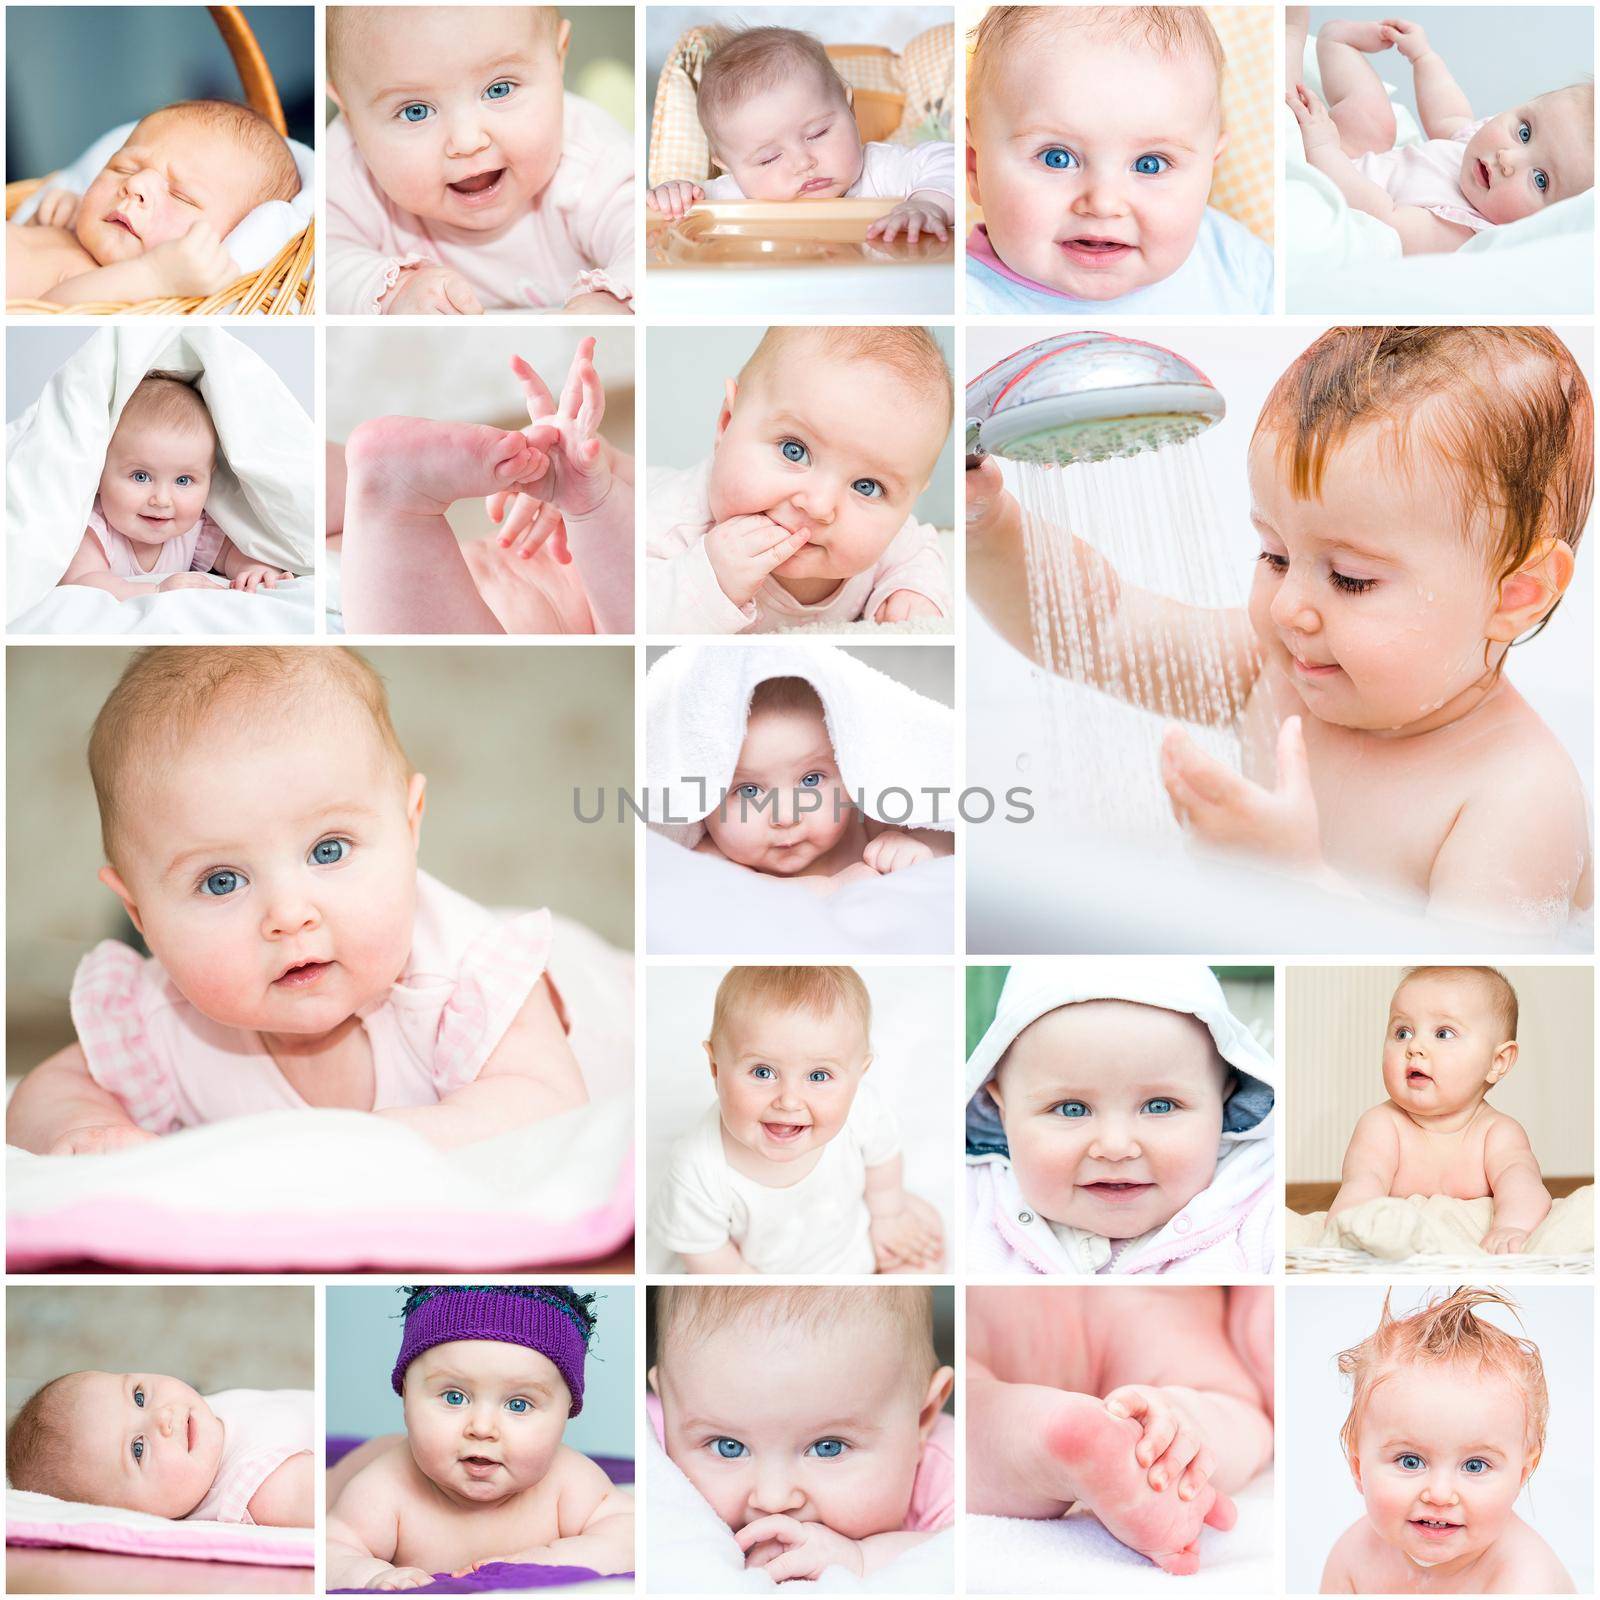 collage of a beautiful baby by tan4ikk1